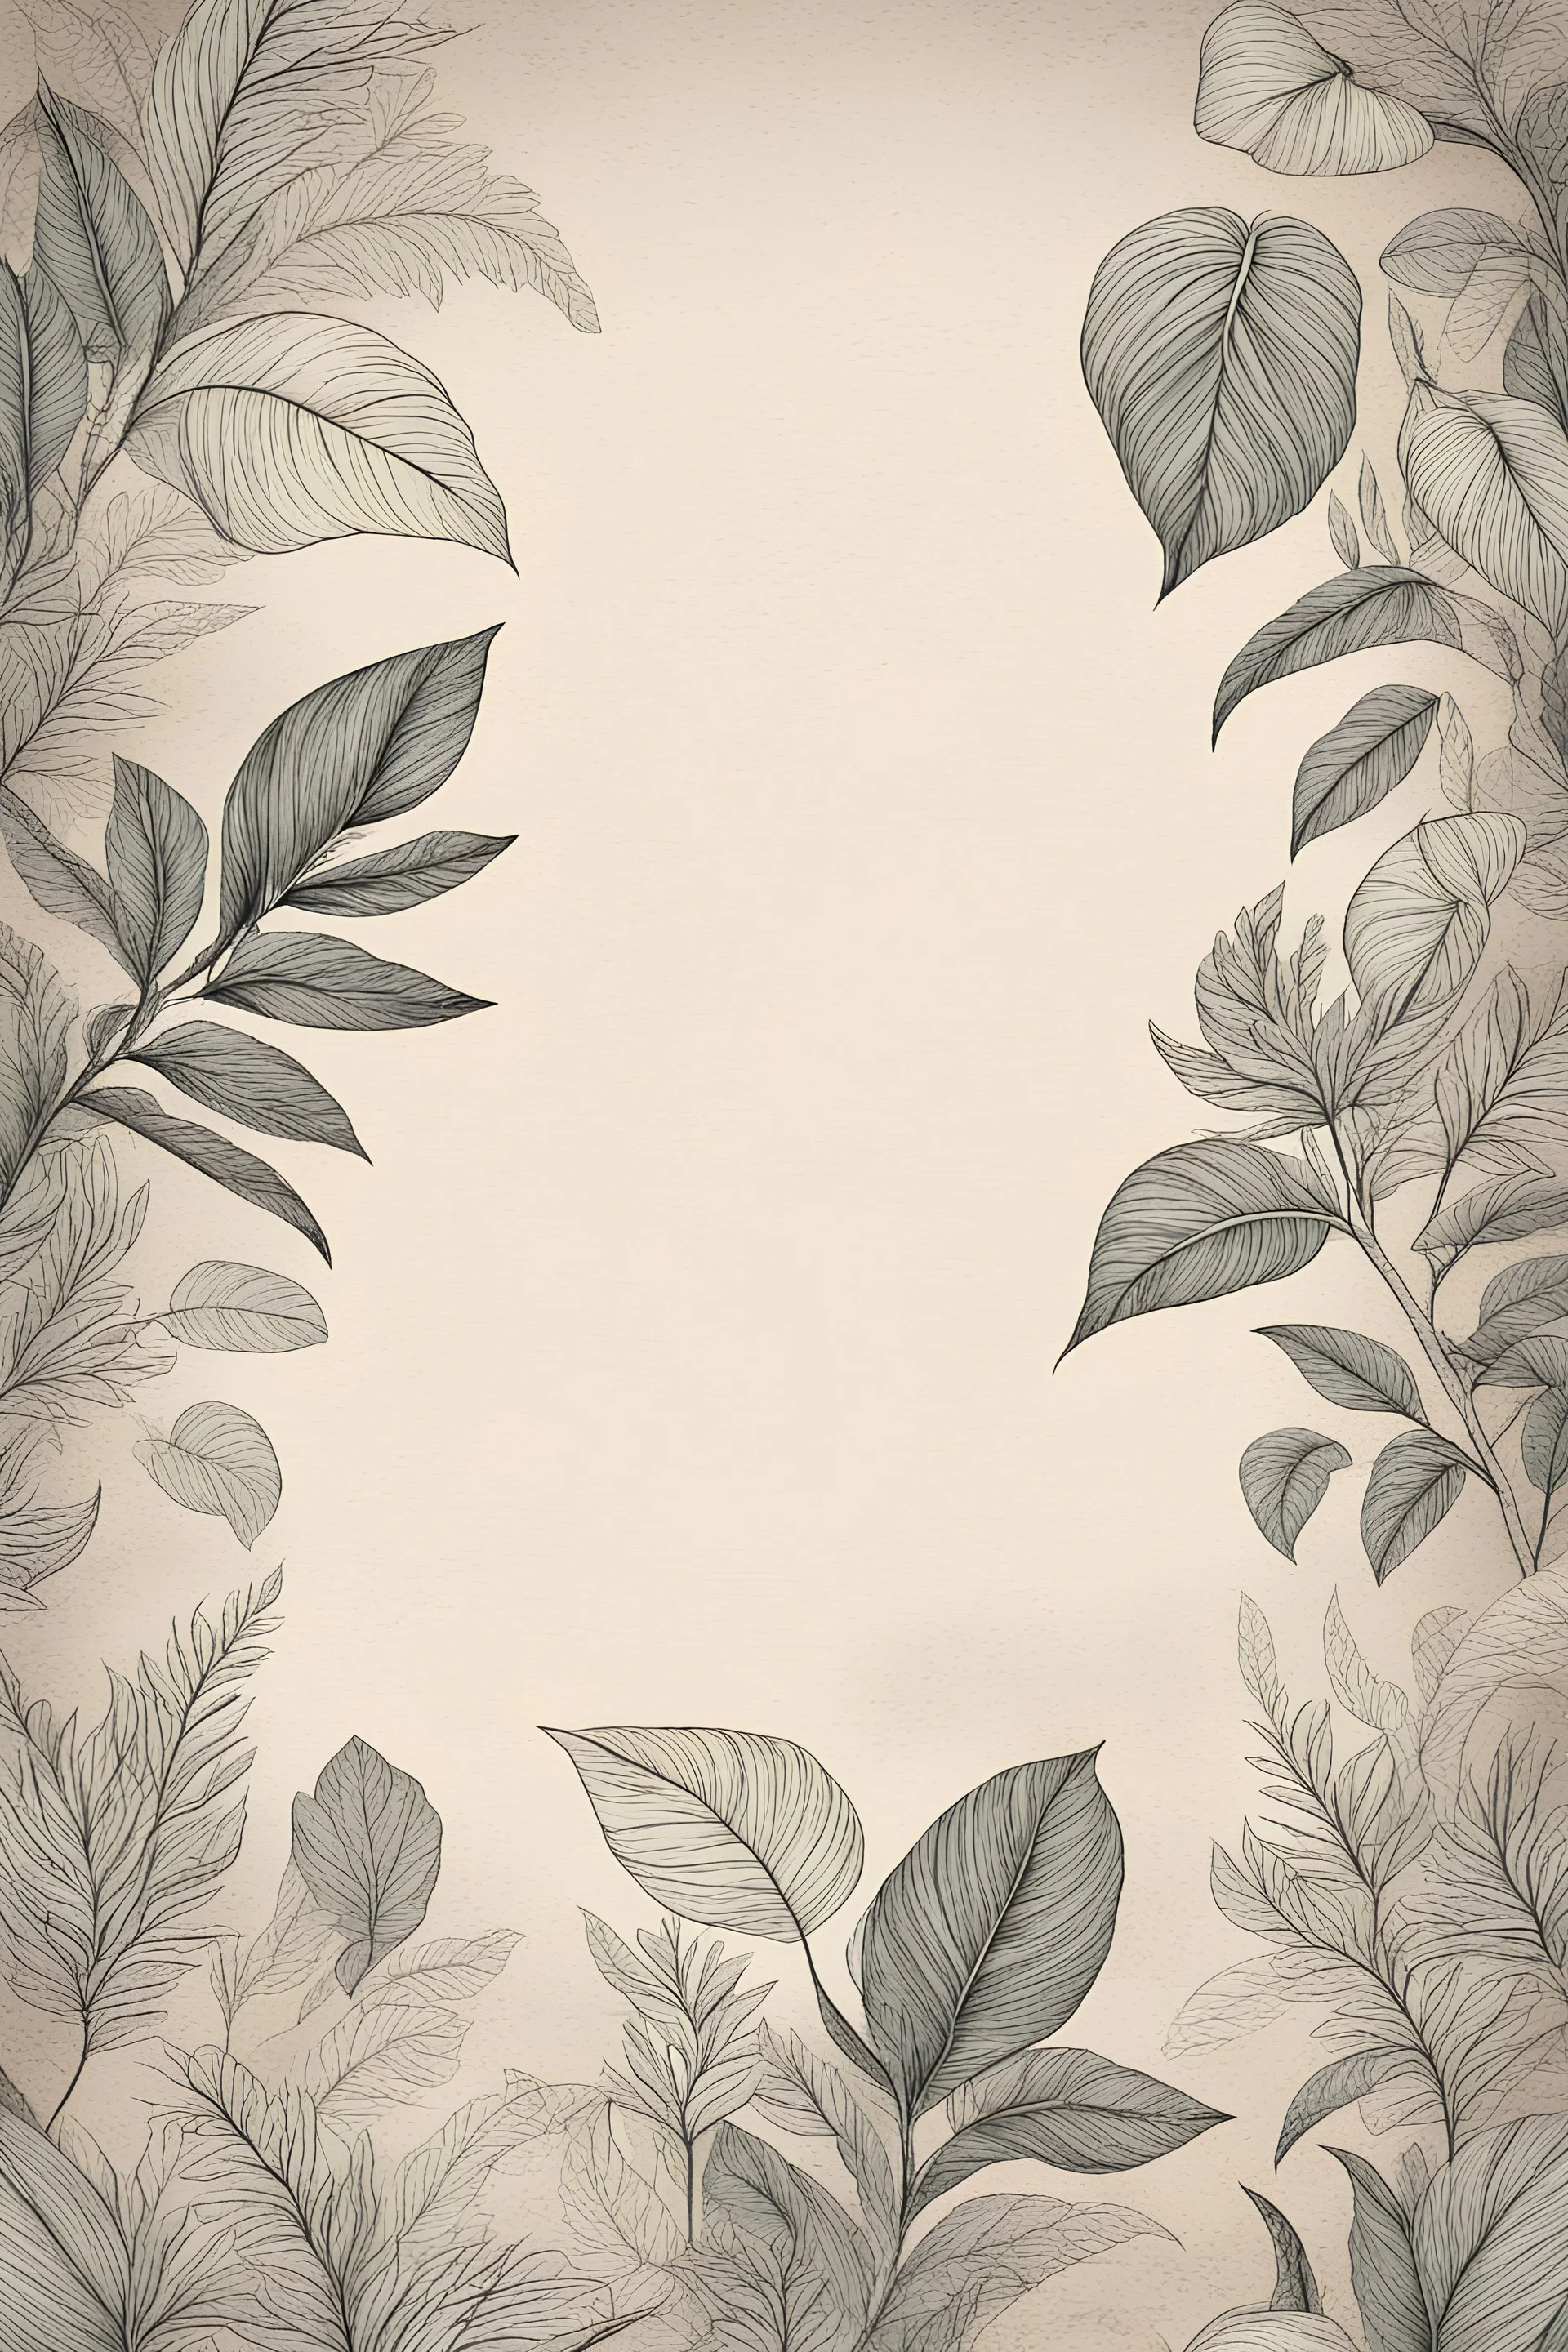 a nice background for a menu with drawn plants